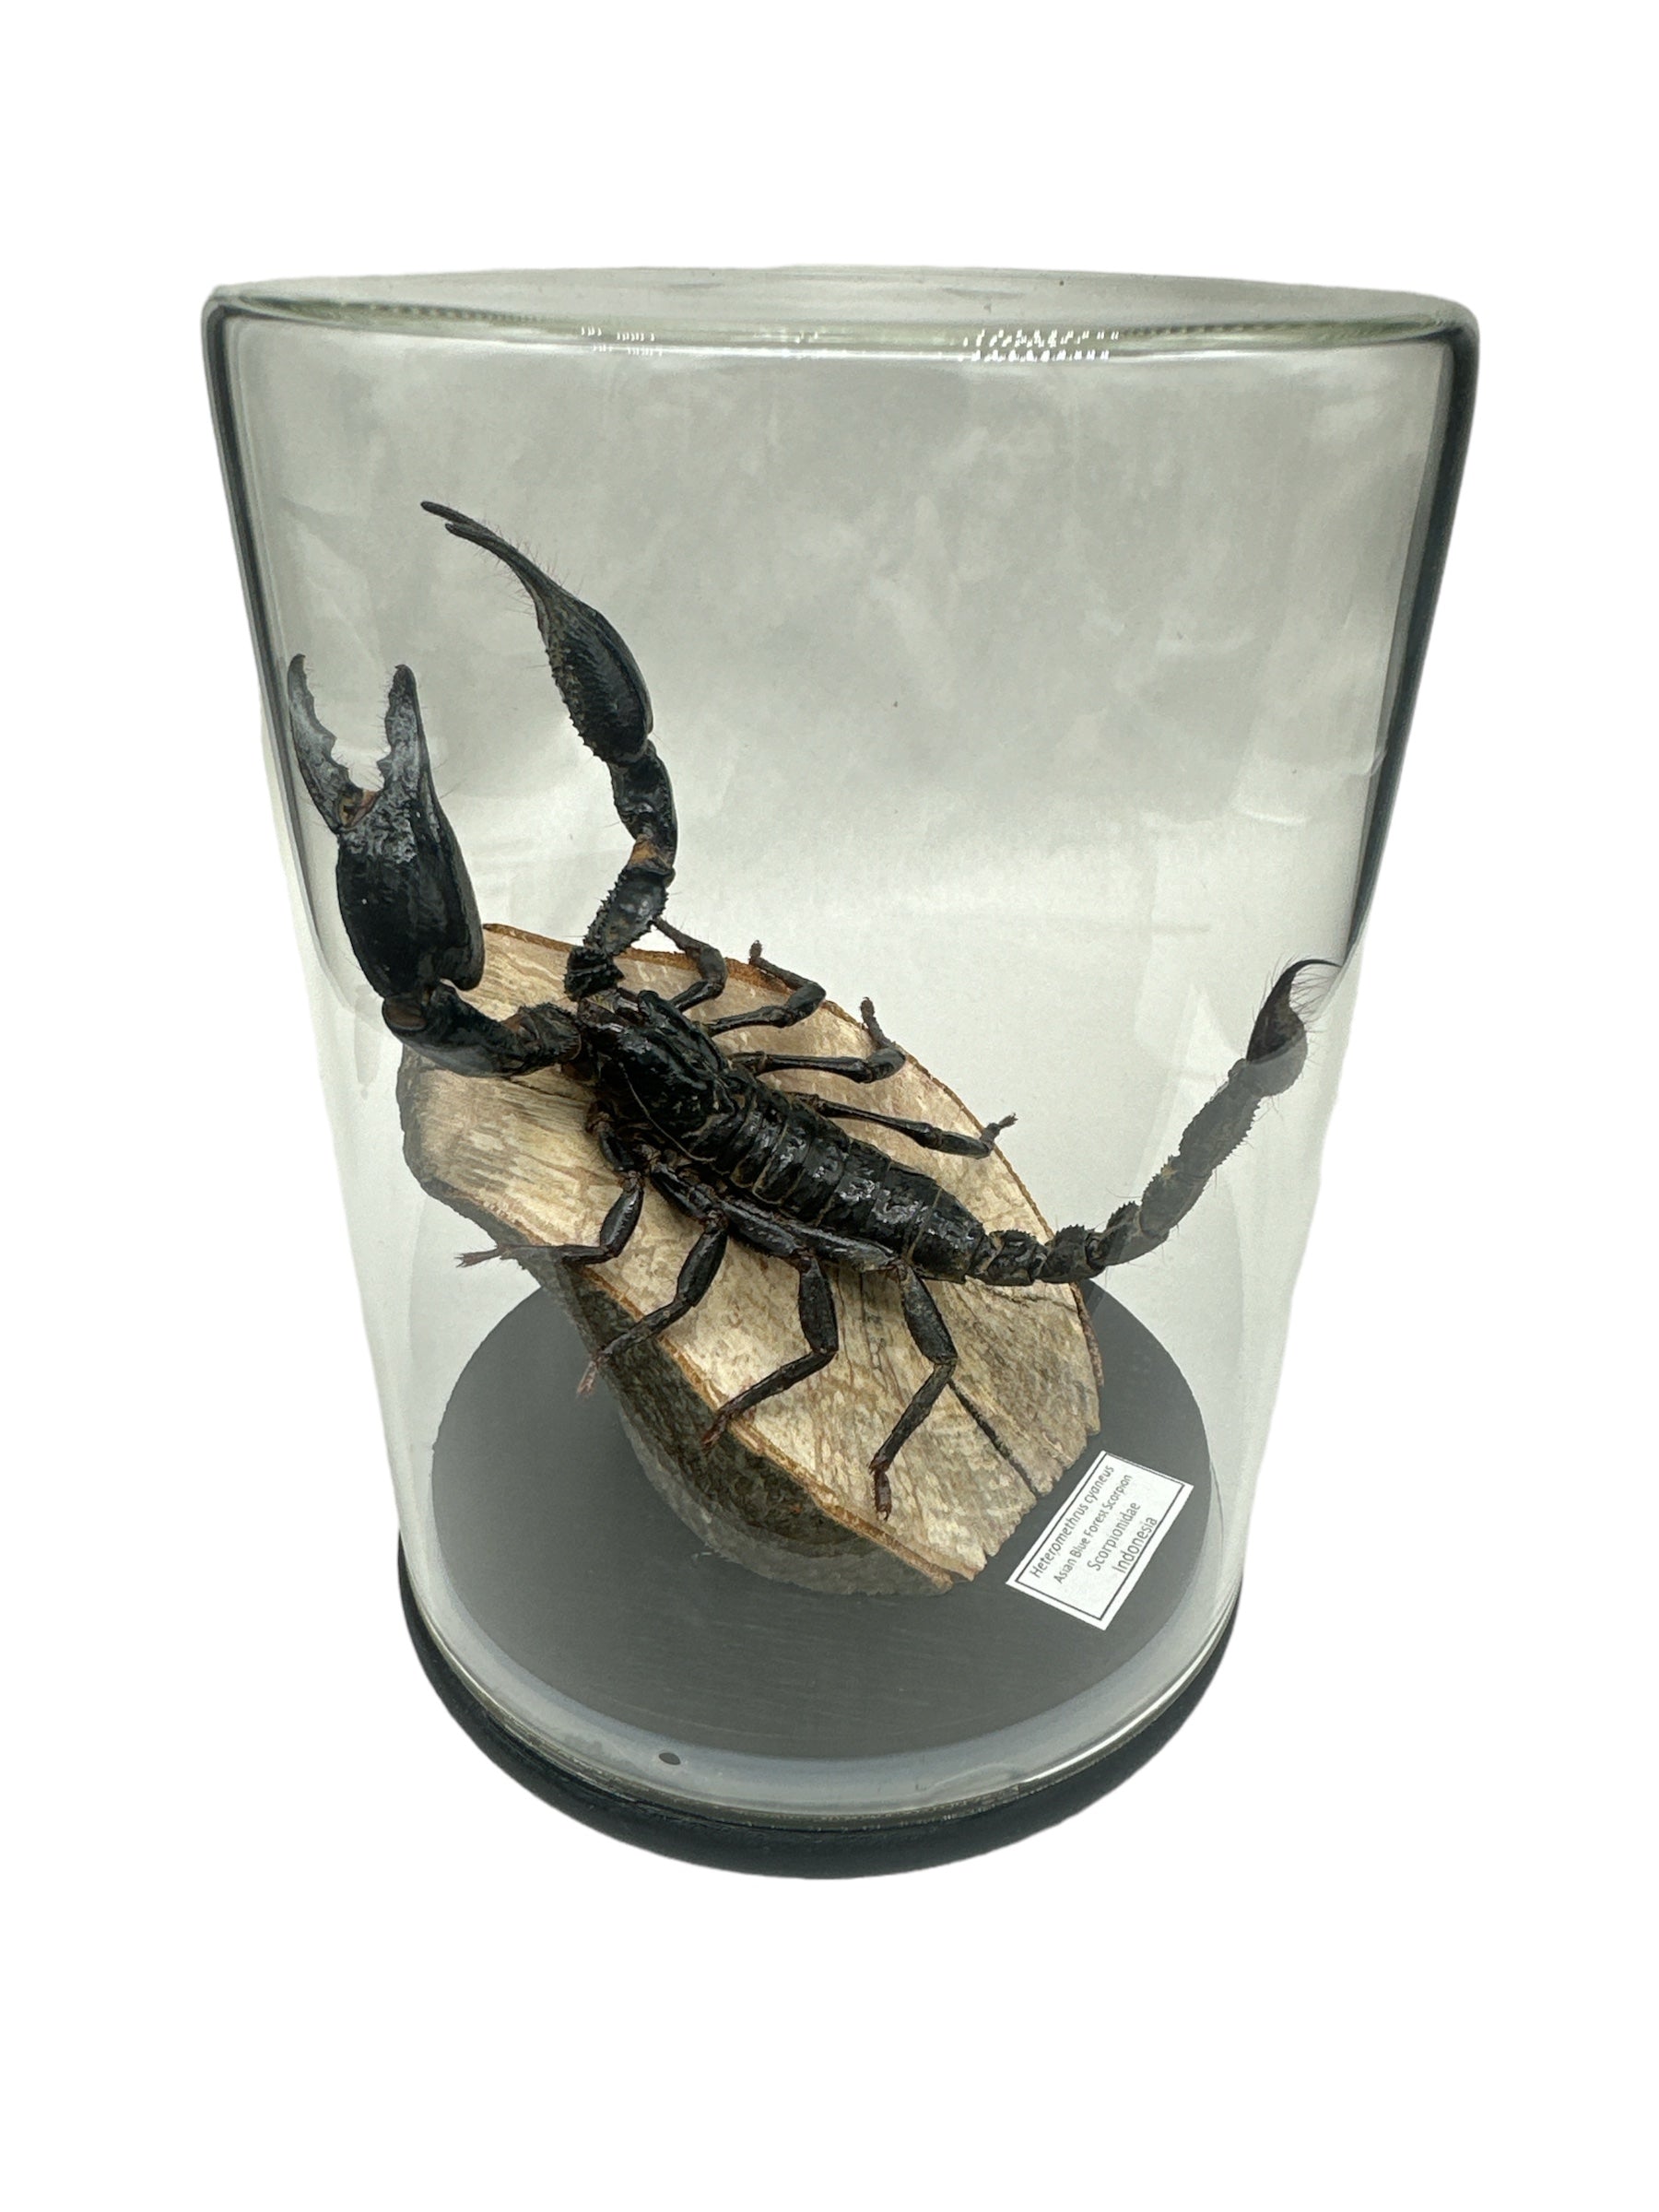 Banded Flat Rock Scorpion (Hadogenes paucidens) - Glass Dome - Large